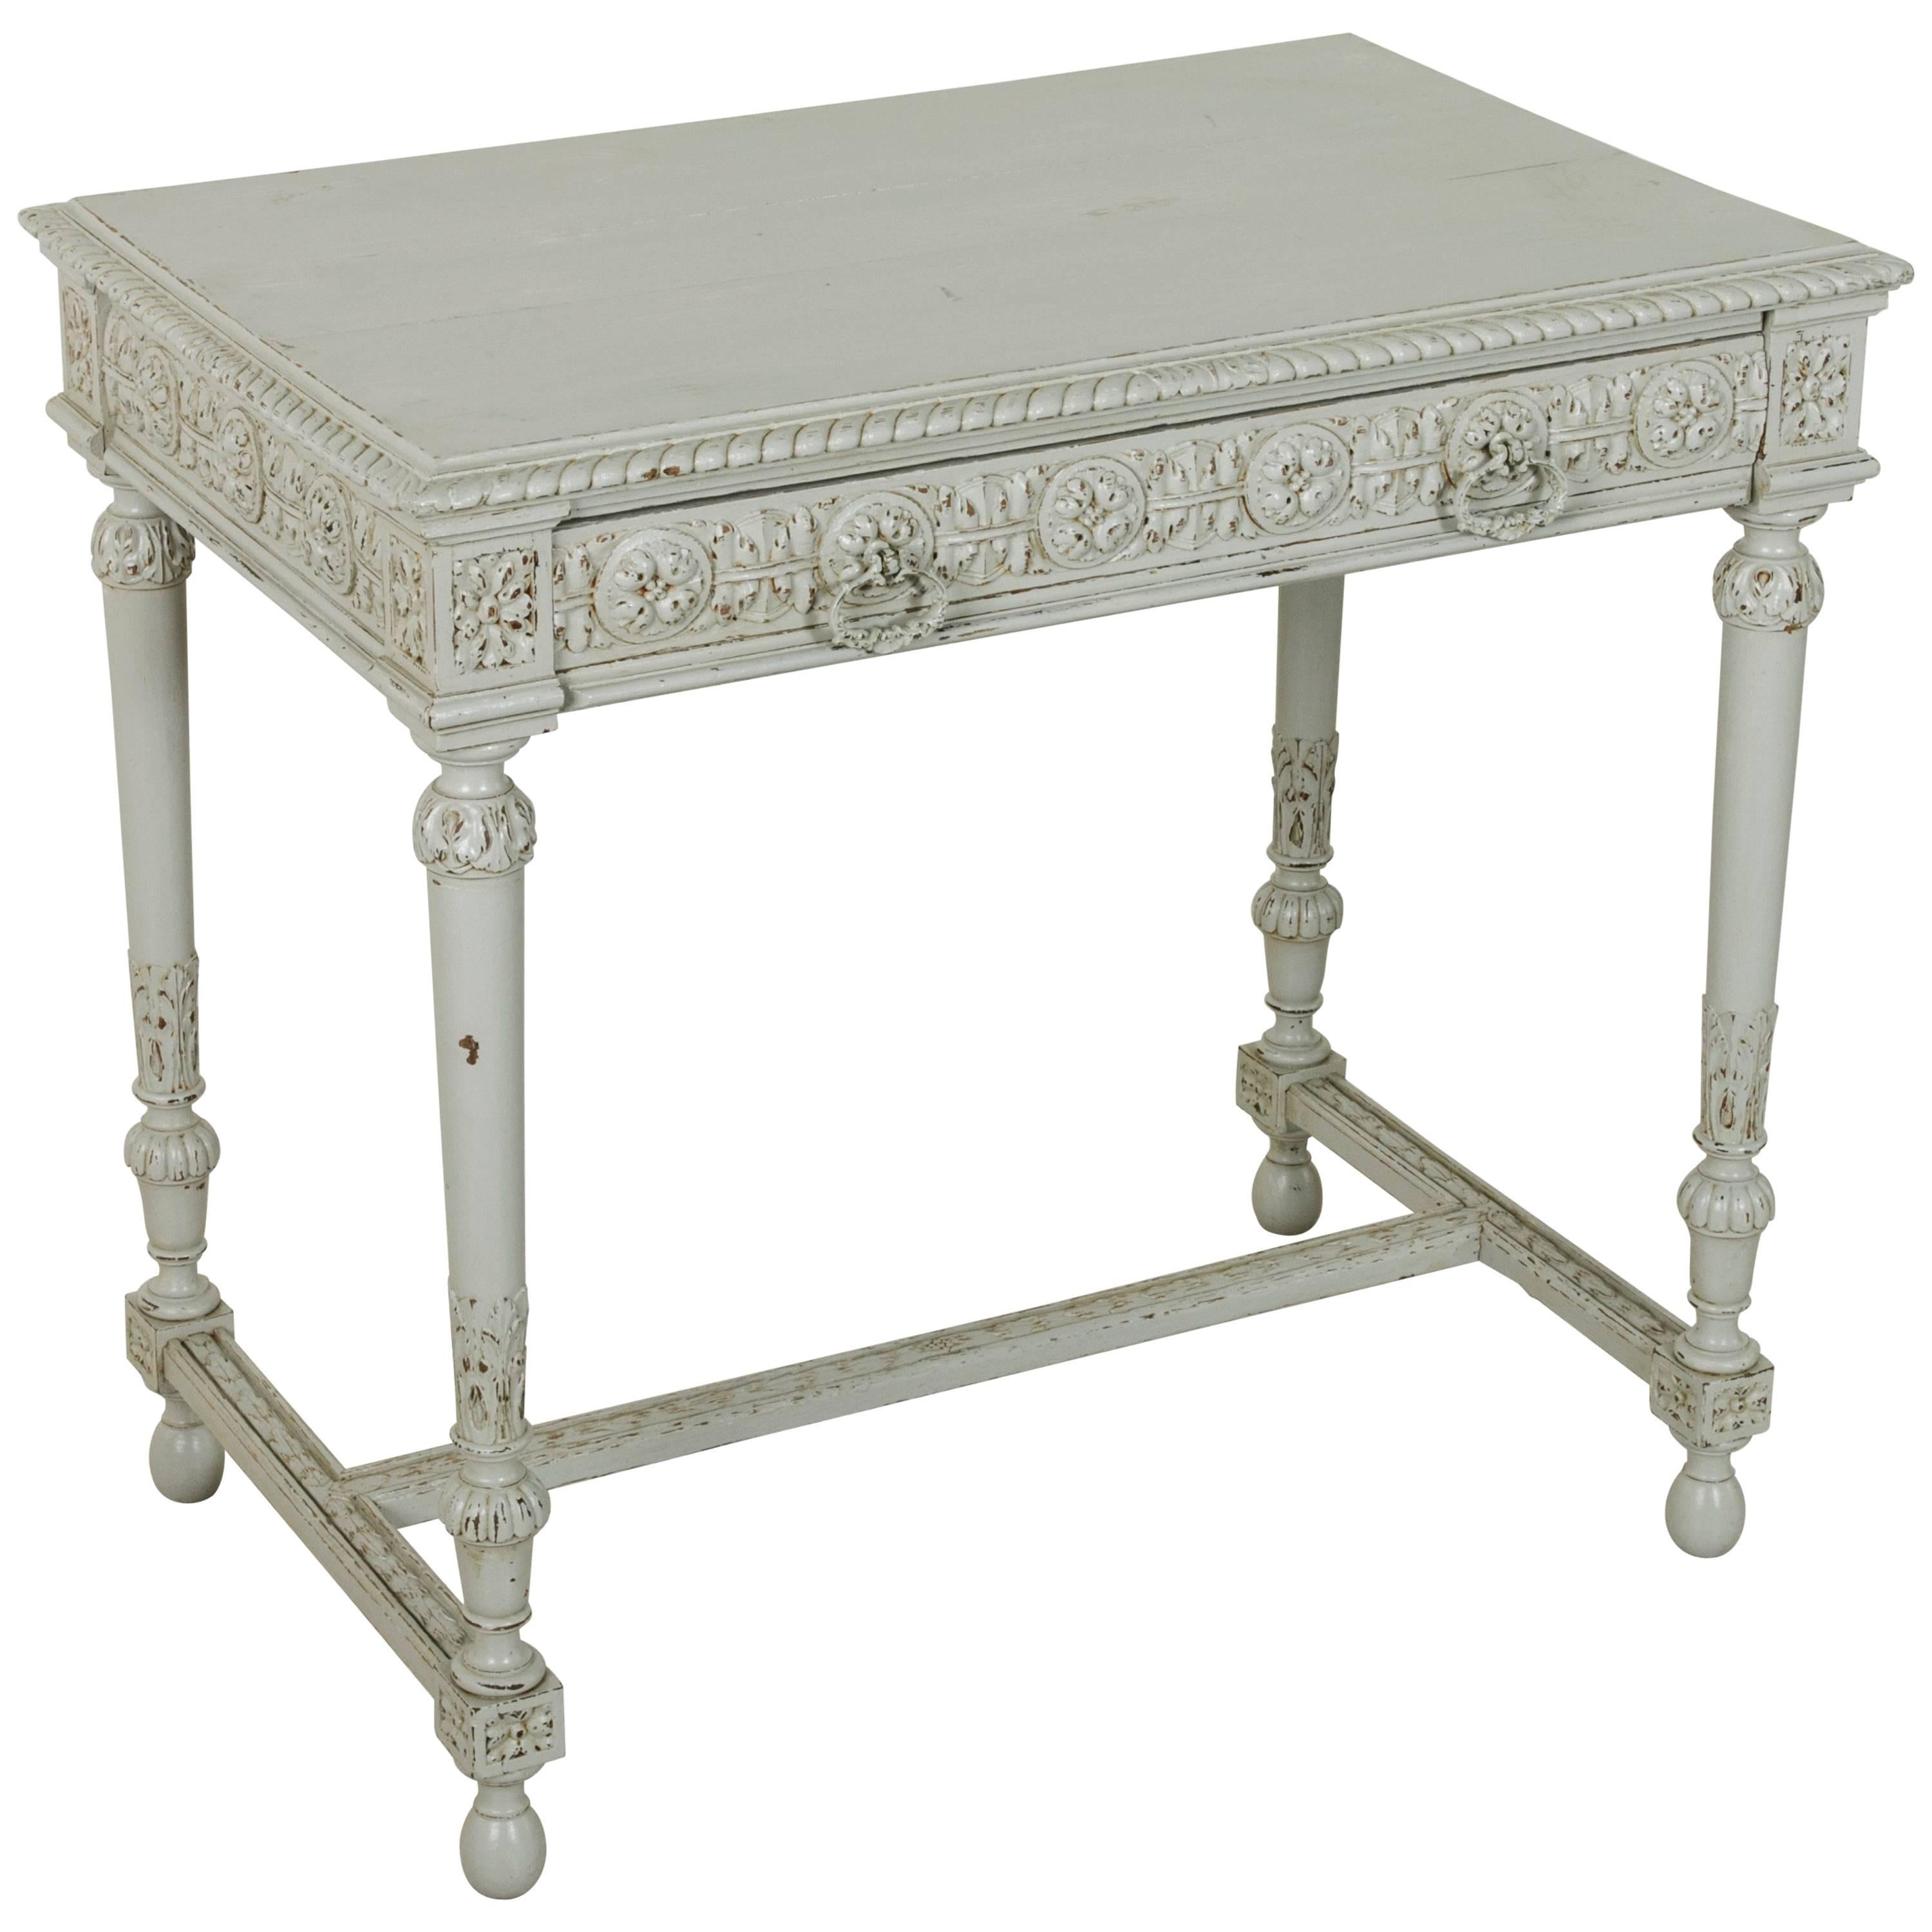 Late 19th Century Painted, Hand-Carved Louis XVI Style Writing Desk with Drawer